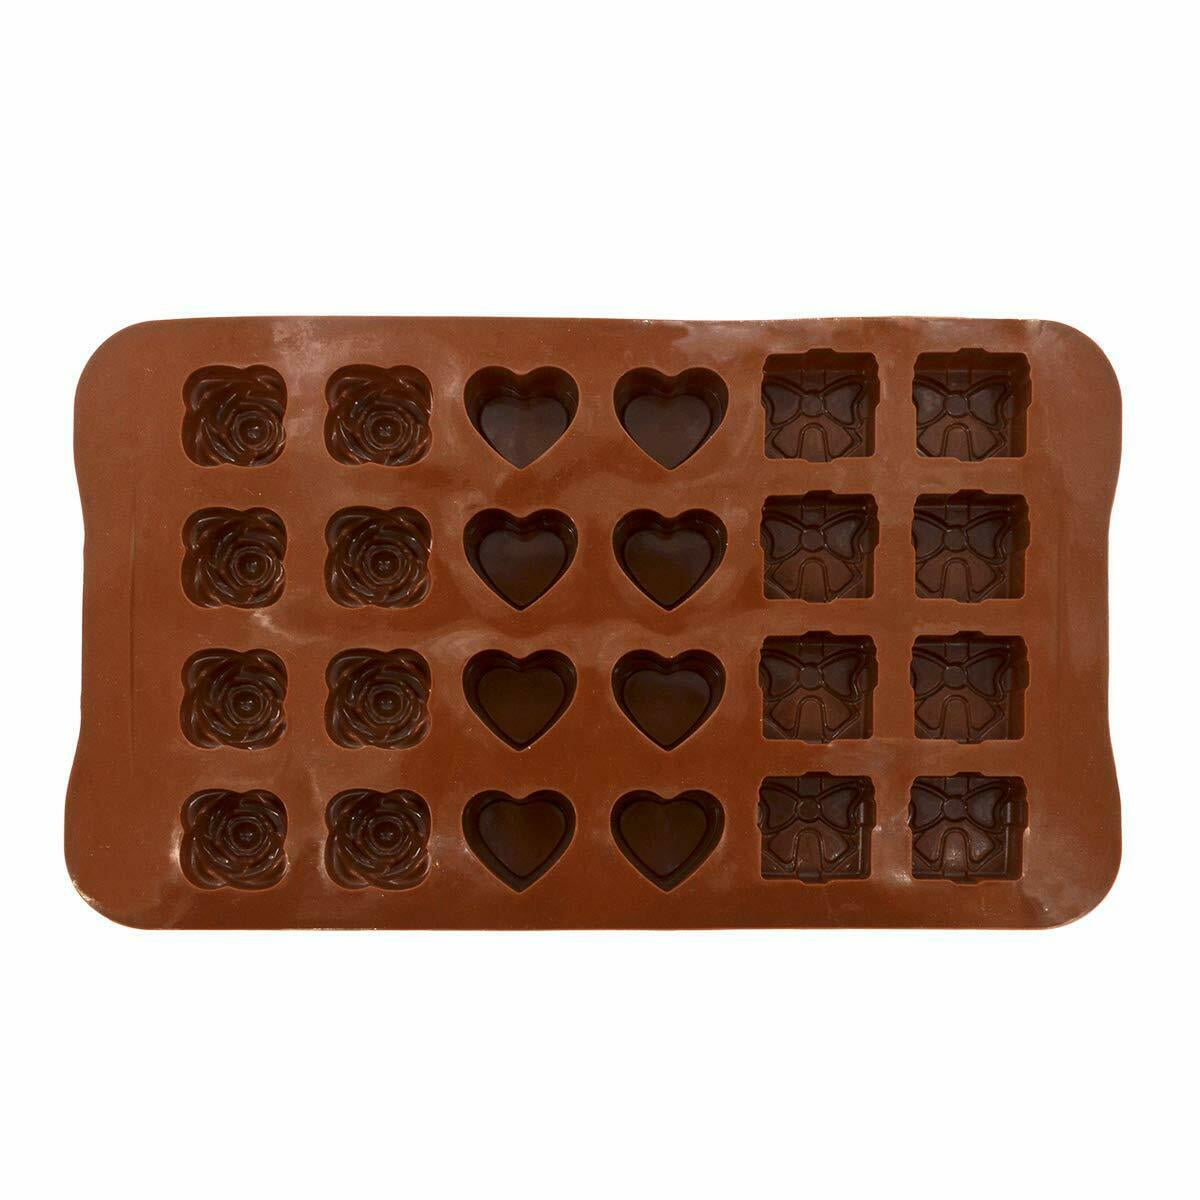 Silicone Mould Cake Decorating Chocolate Baking Mold Wax Melts Ice Rose Hearts 